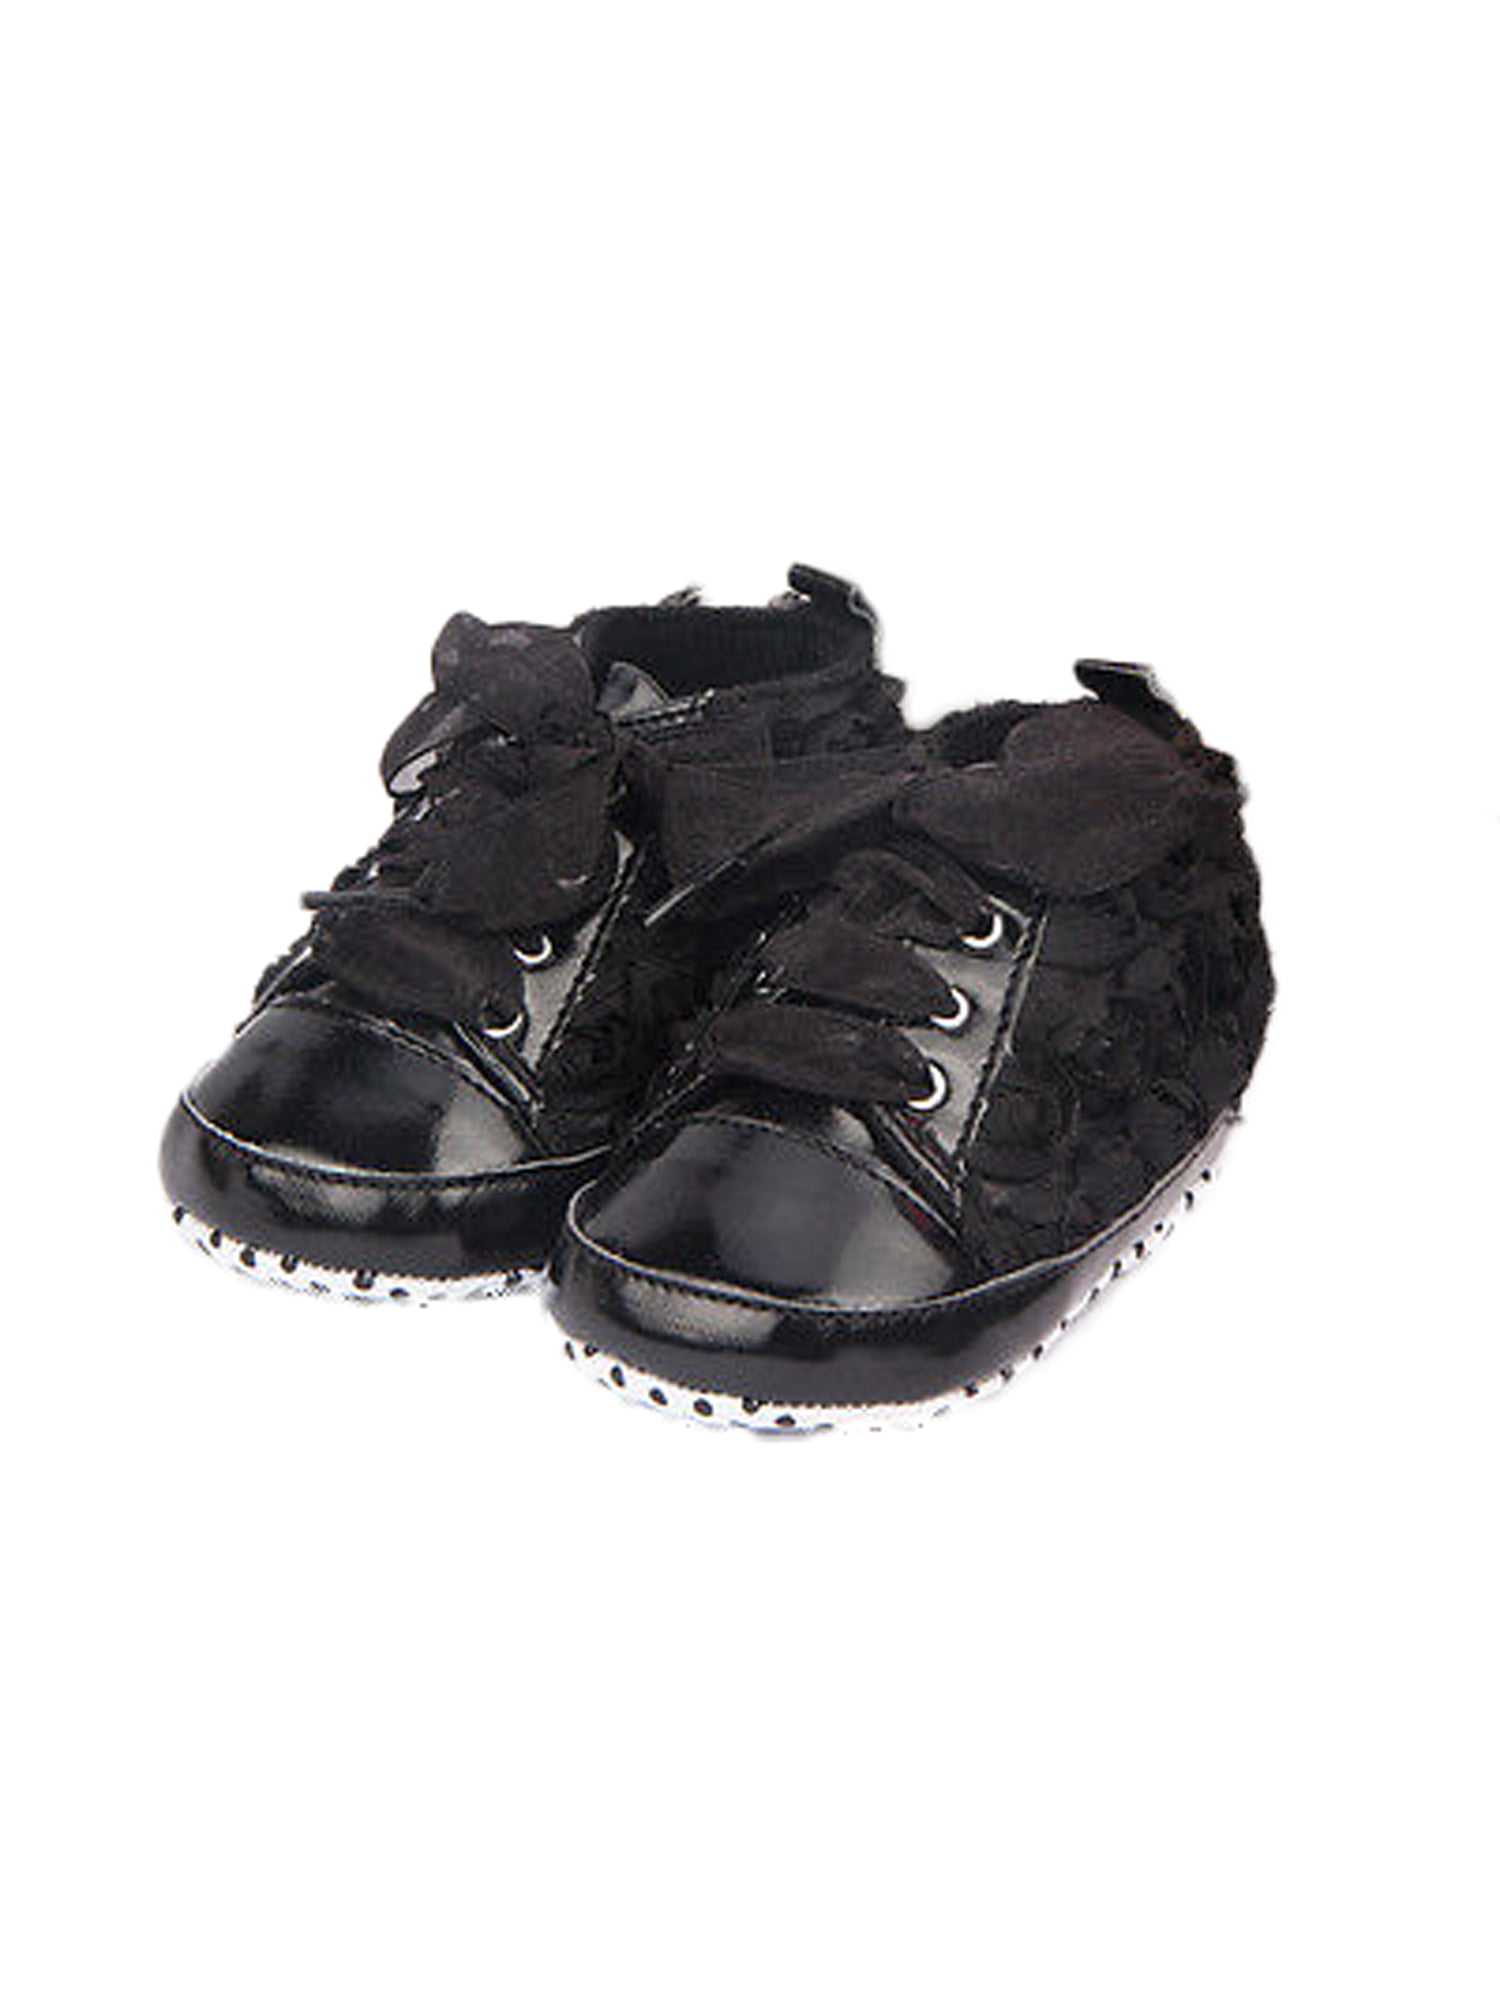 Nituyy Newborn Infant Baby Shoes First 